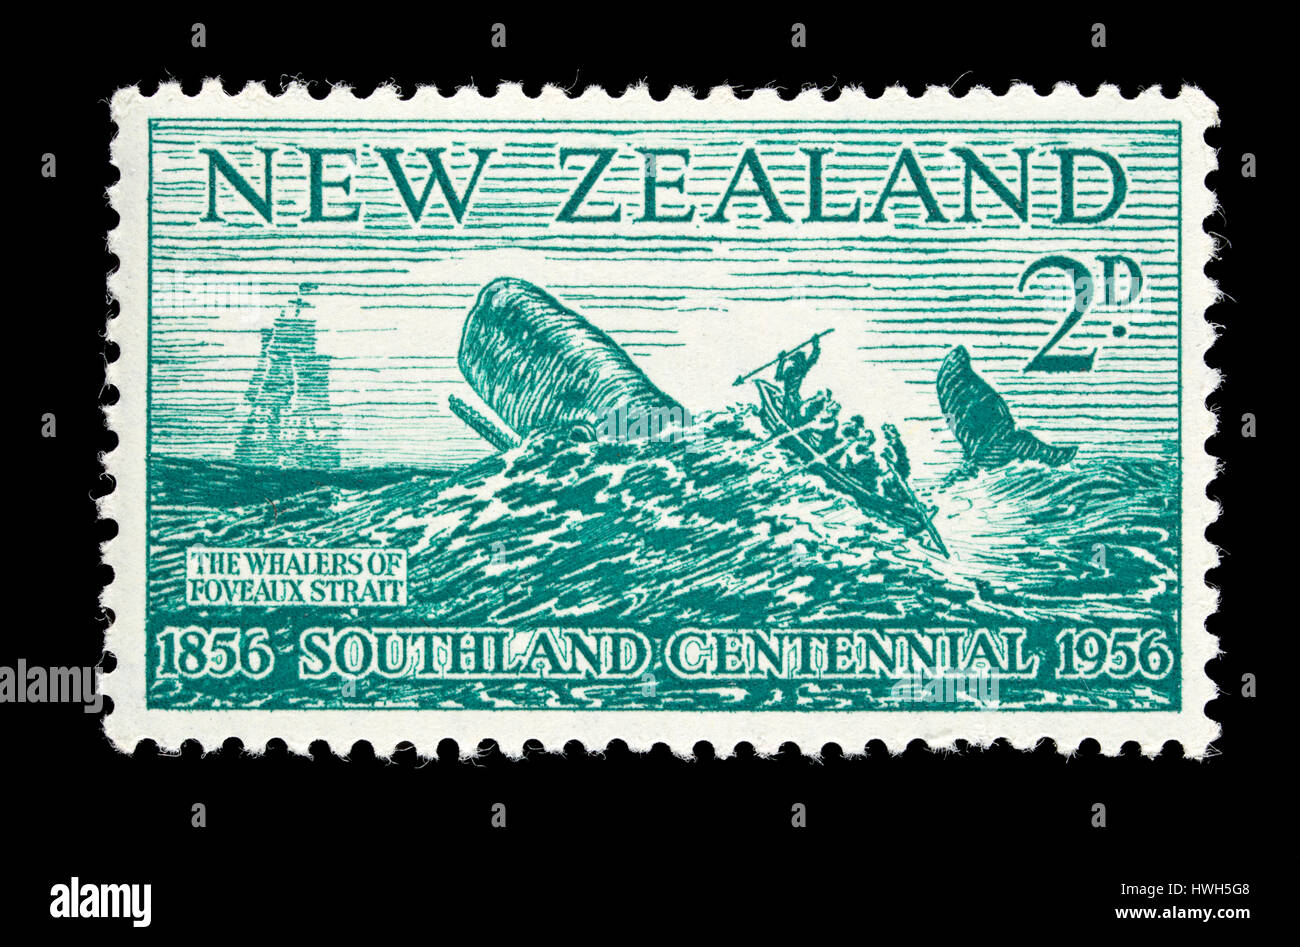 Postage stamp from New Zealand depicting whalers at Foveaux Strait, centennial of Southland. Stock Photo